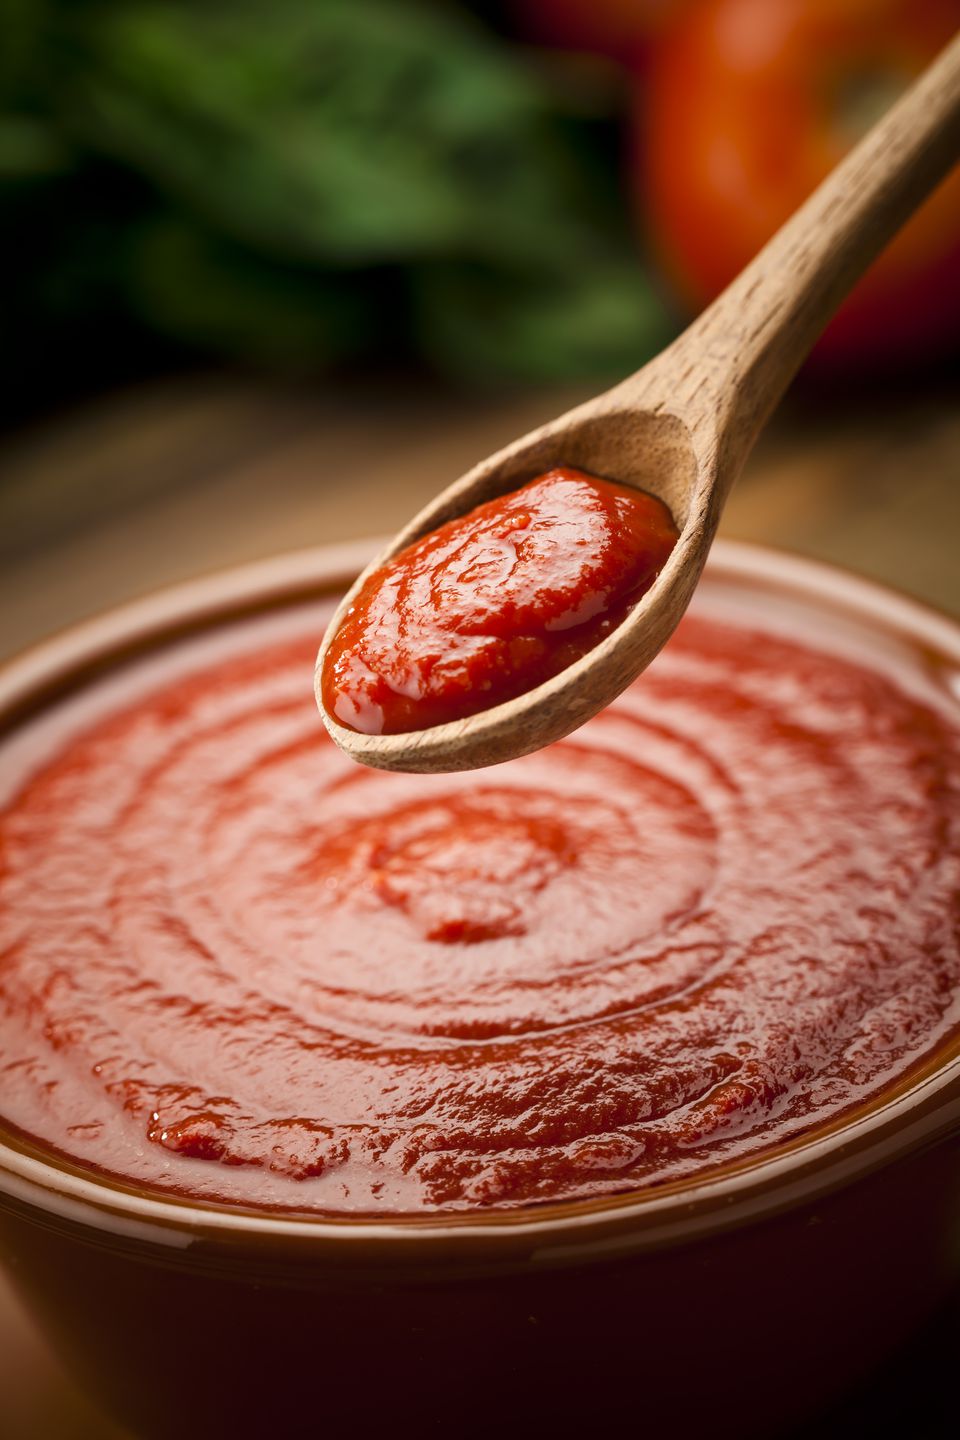 How to Make Your Own Tomato Paste